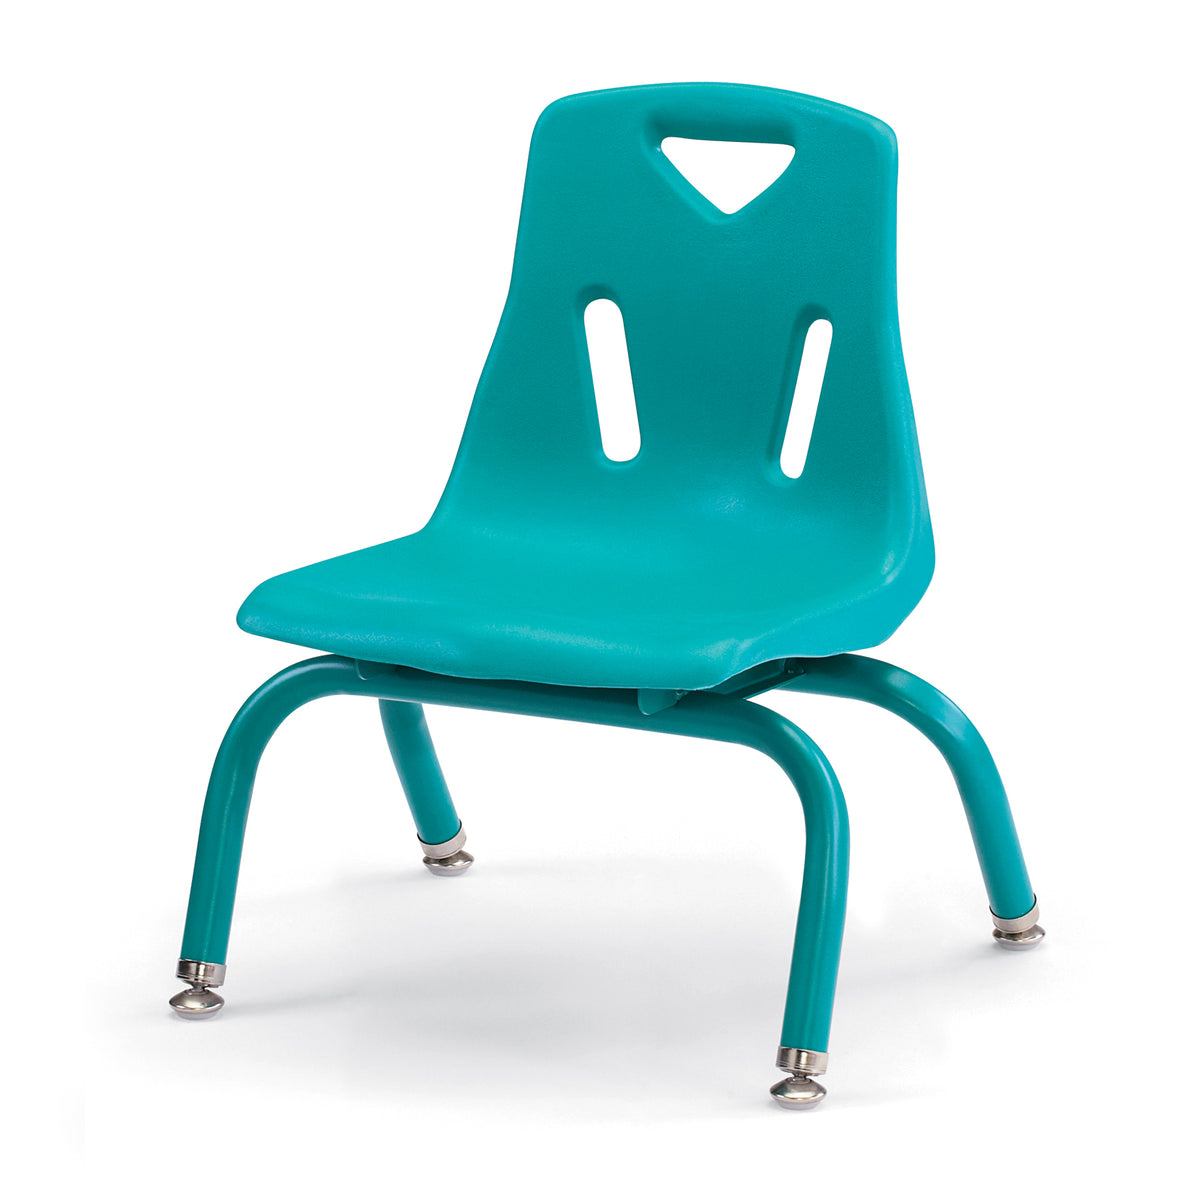 8118JC1005, Berries Stacking Chair with Powder-Coated Legs - 8" Ht - Teal